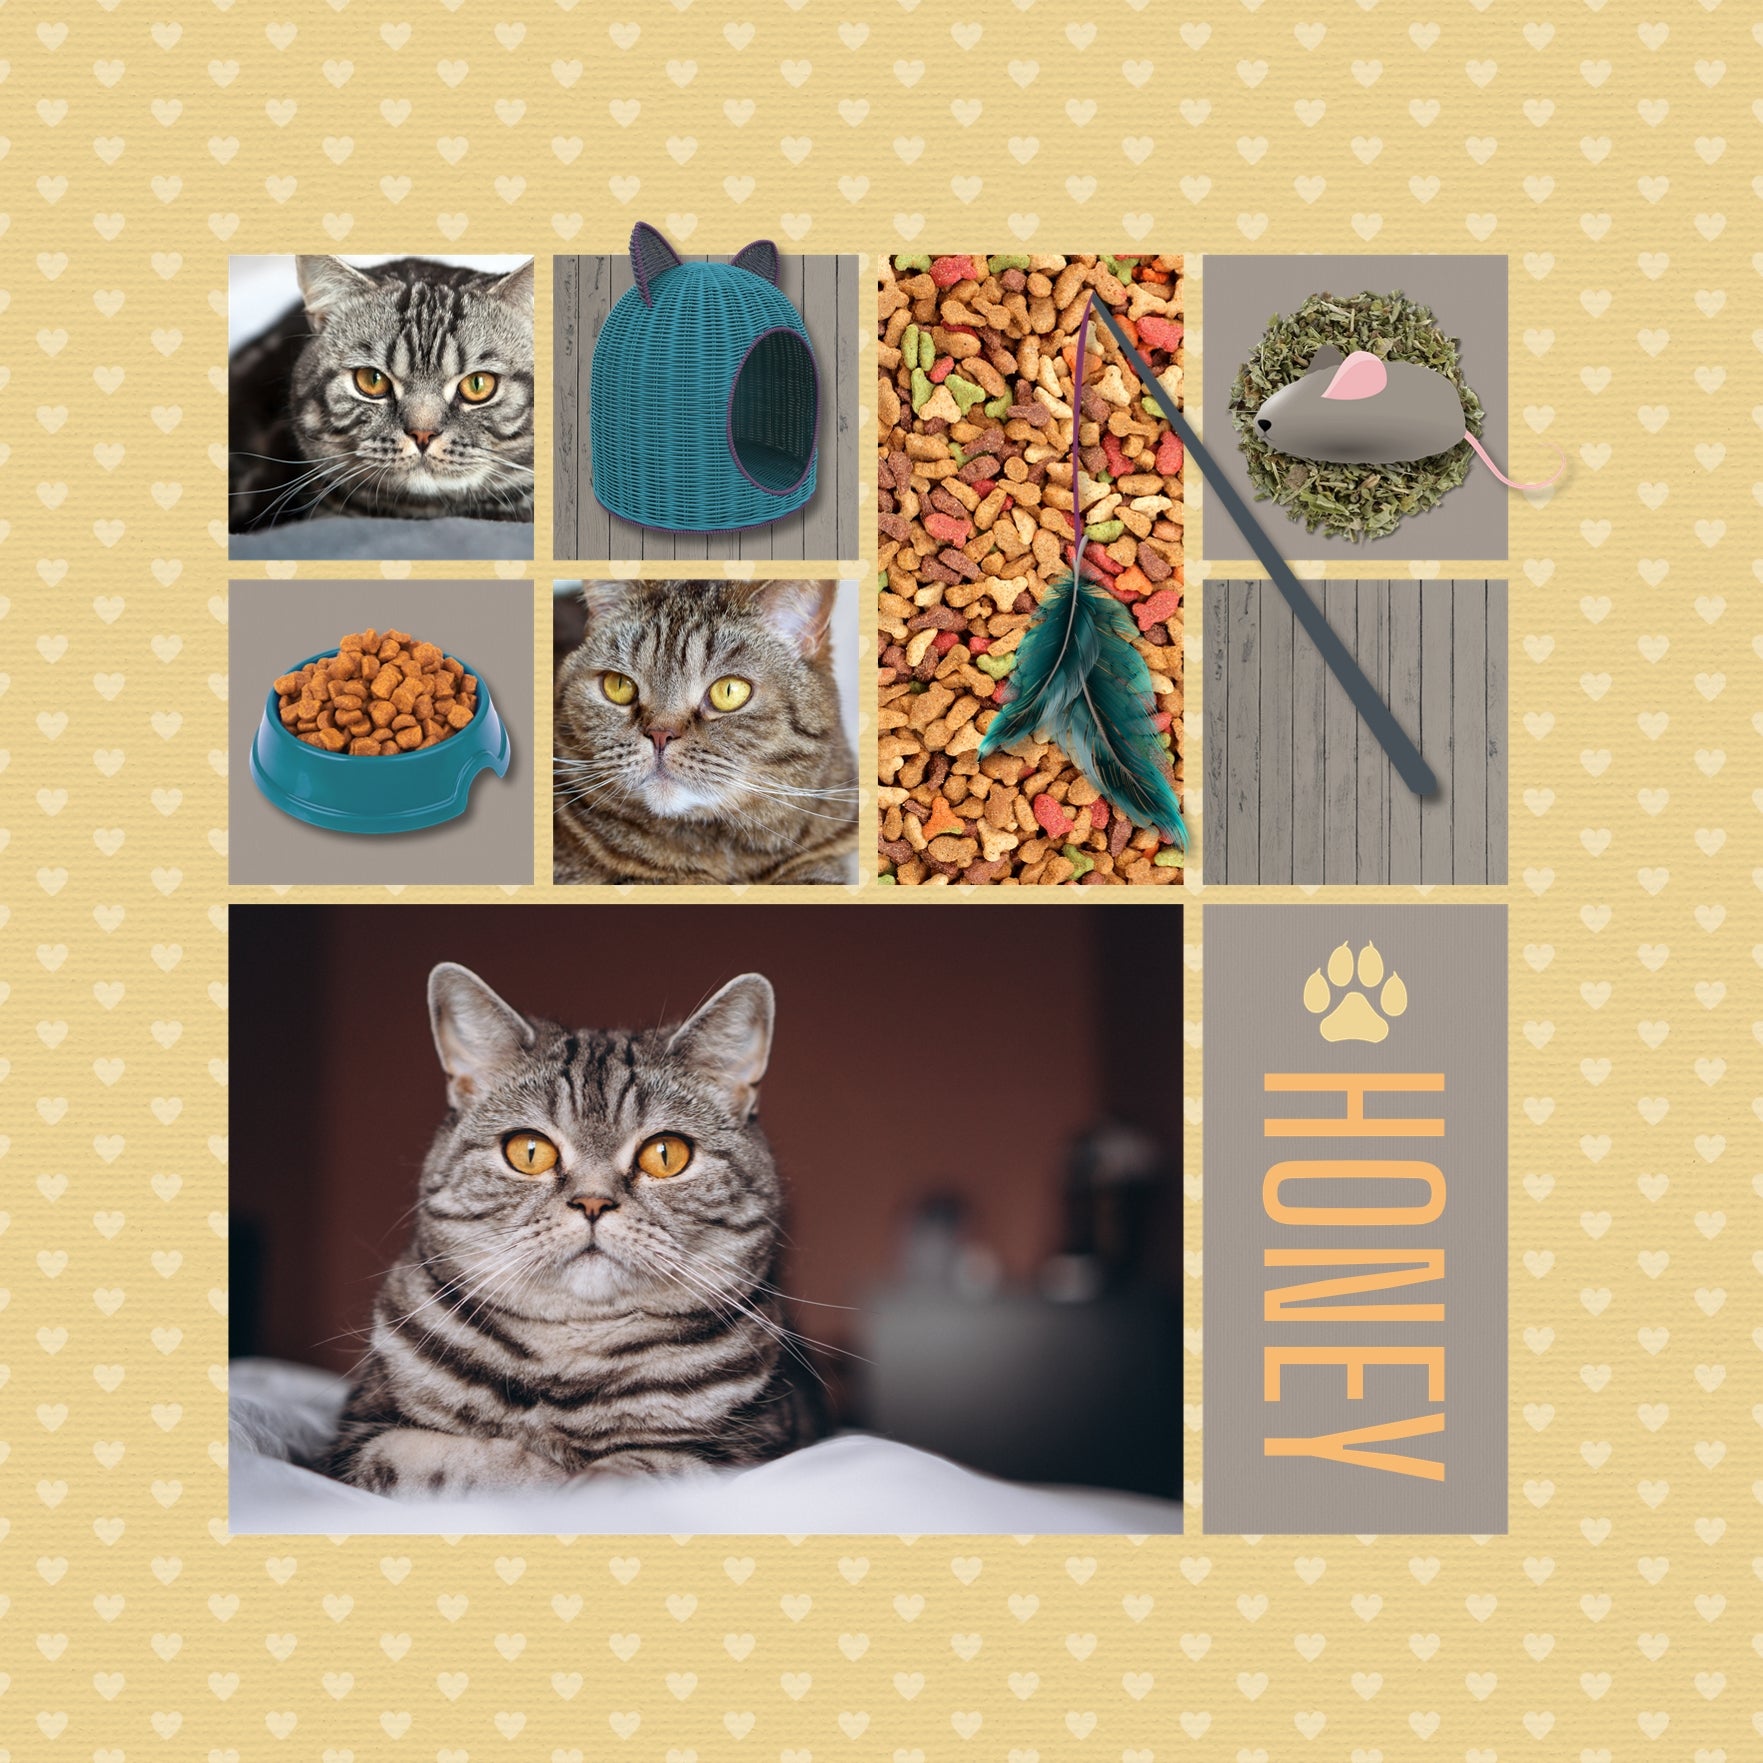 Have fun documenting your favorite cats with these fun, realistic digital art embellishments by Lucky Girl Creative. Elements include many breeds of kitty cats and puppy dogs in addition to all the pet toys, beds, grooming tools, and food they need.